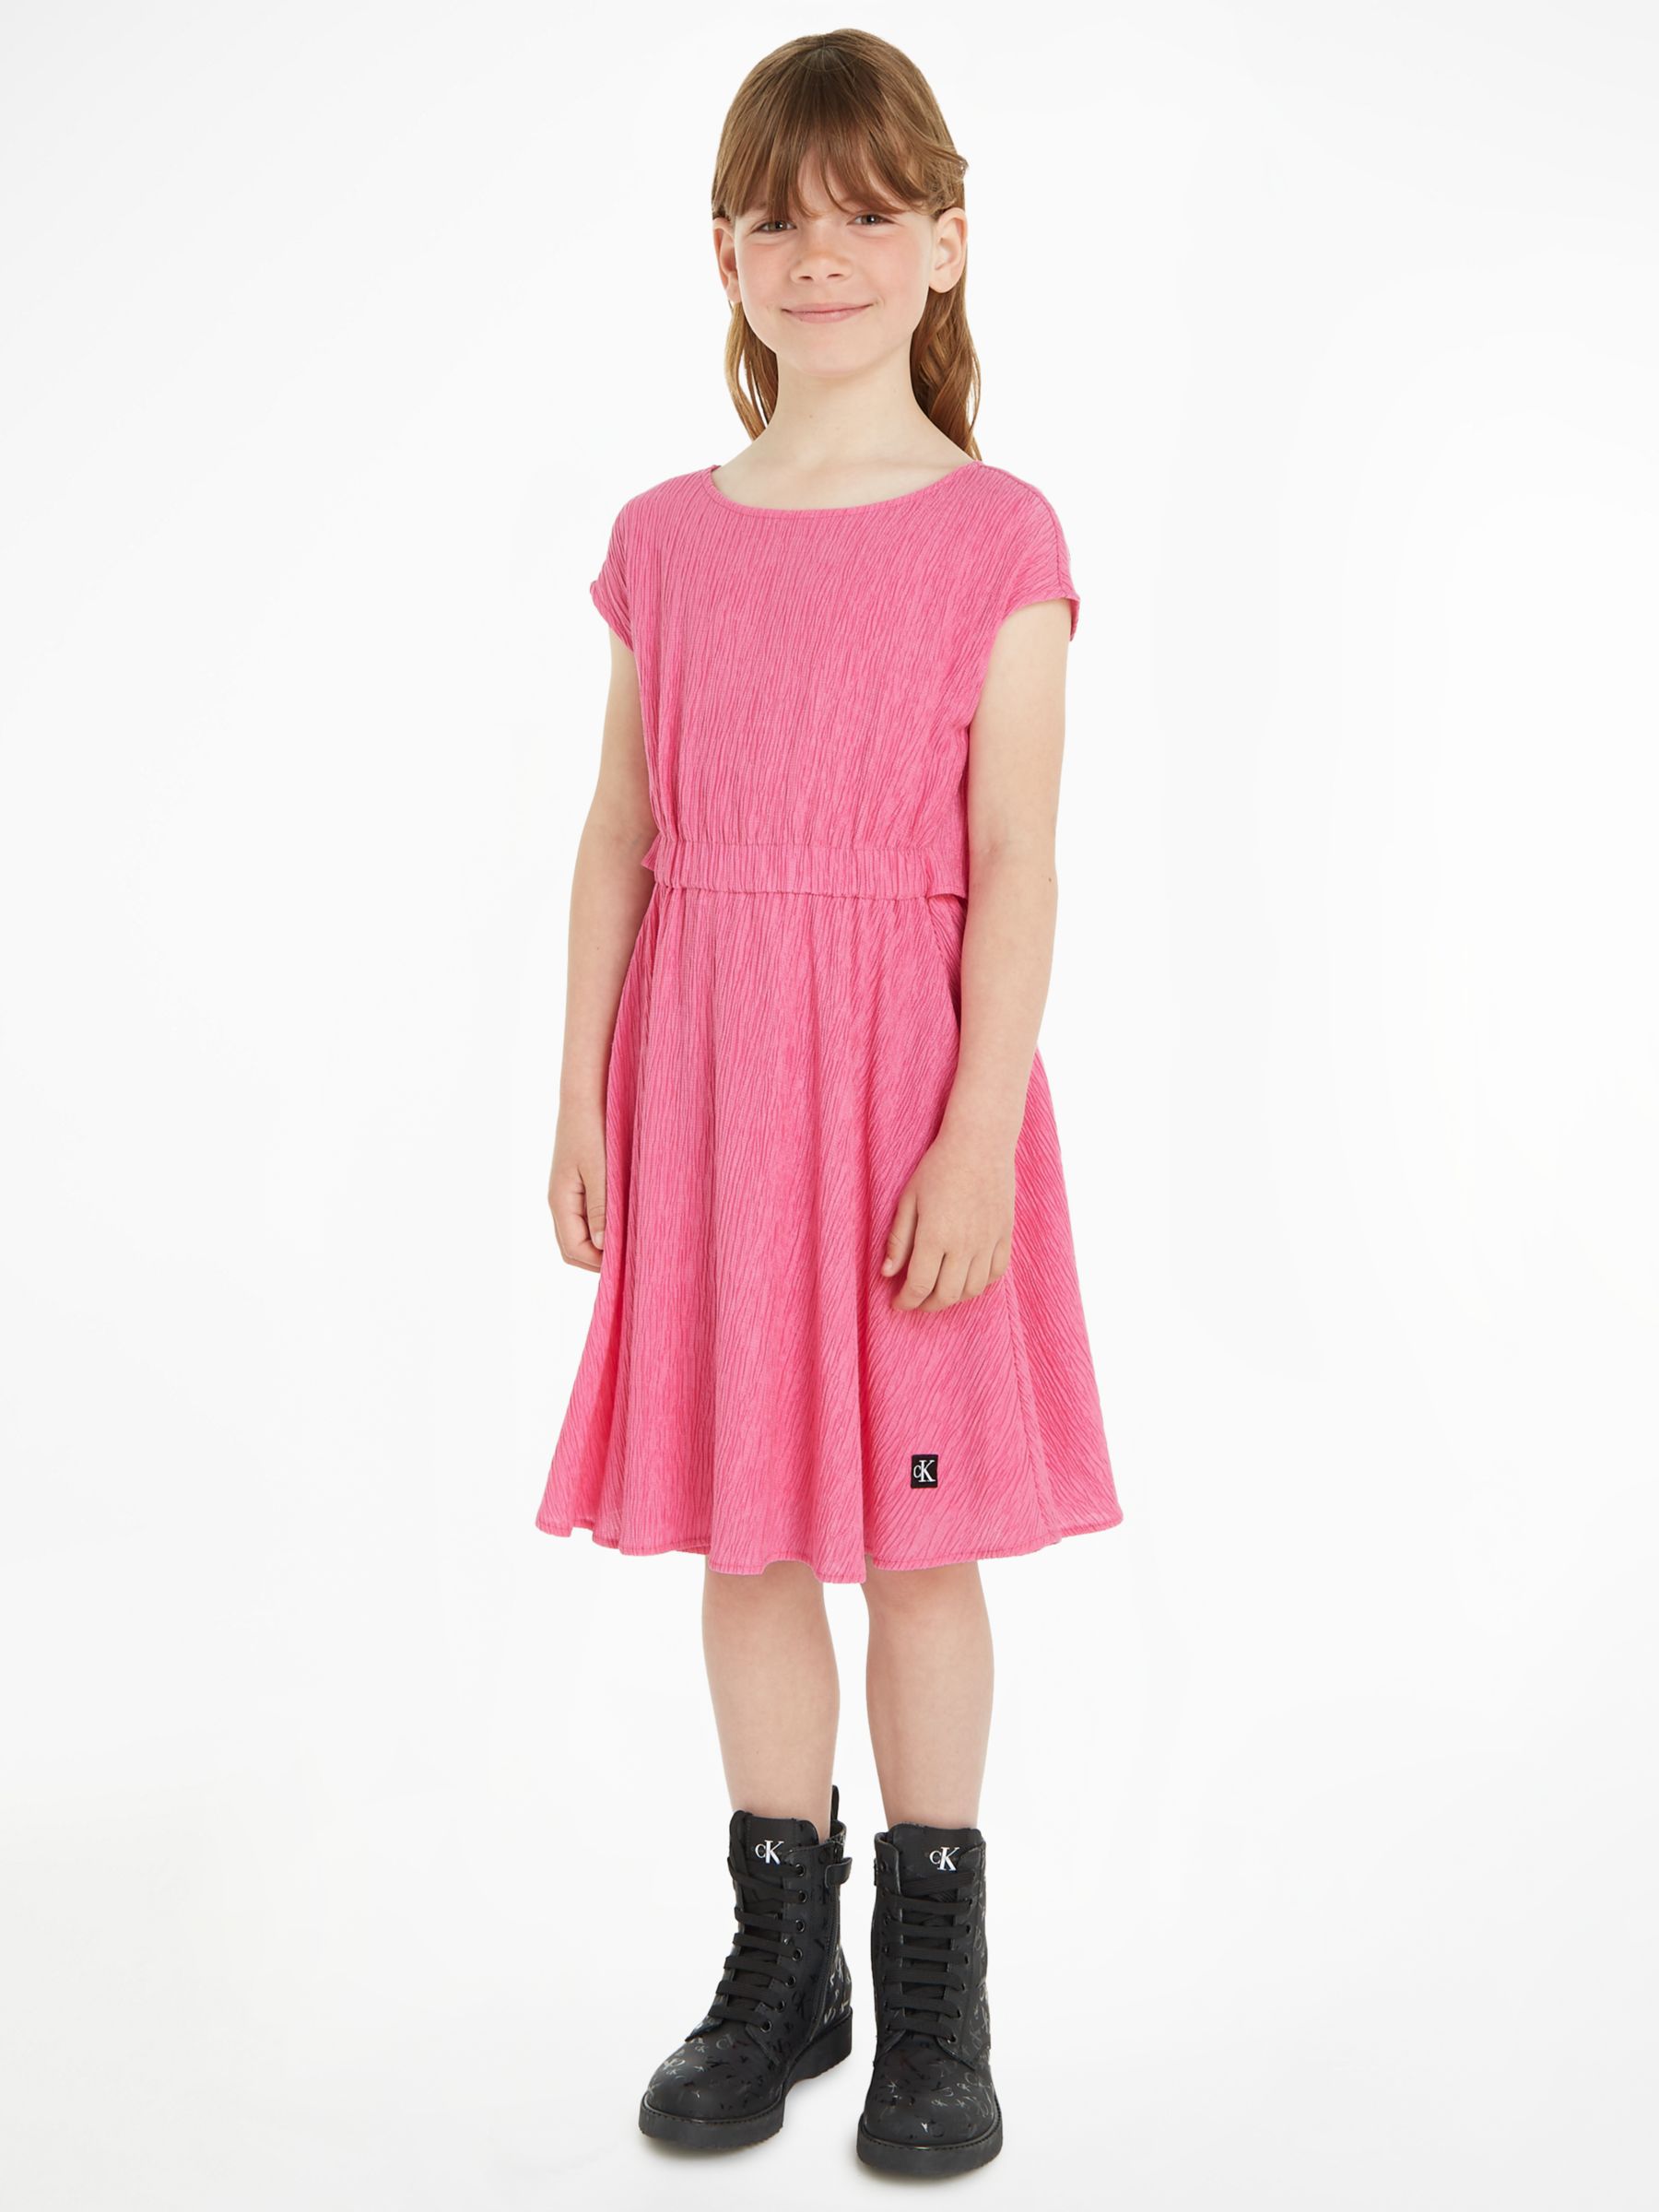 Buy Calvin Klein Kids' Crinkle Fit and Flare Dress, Pink Amour Online at johnlewis.com